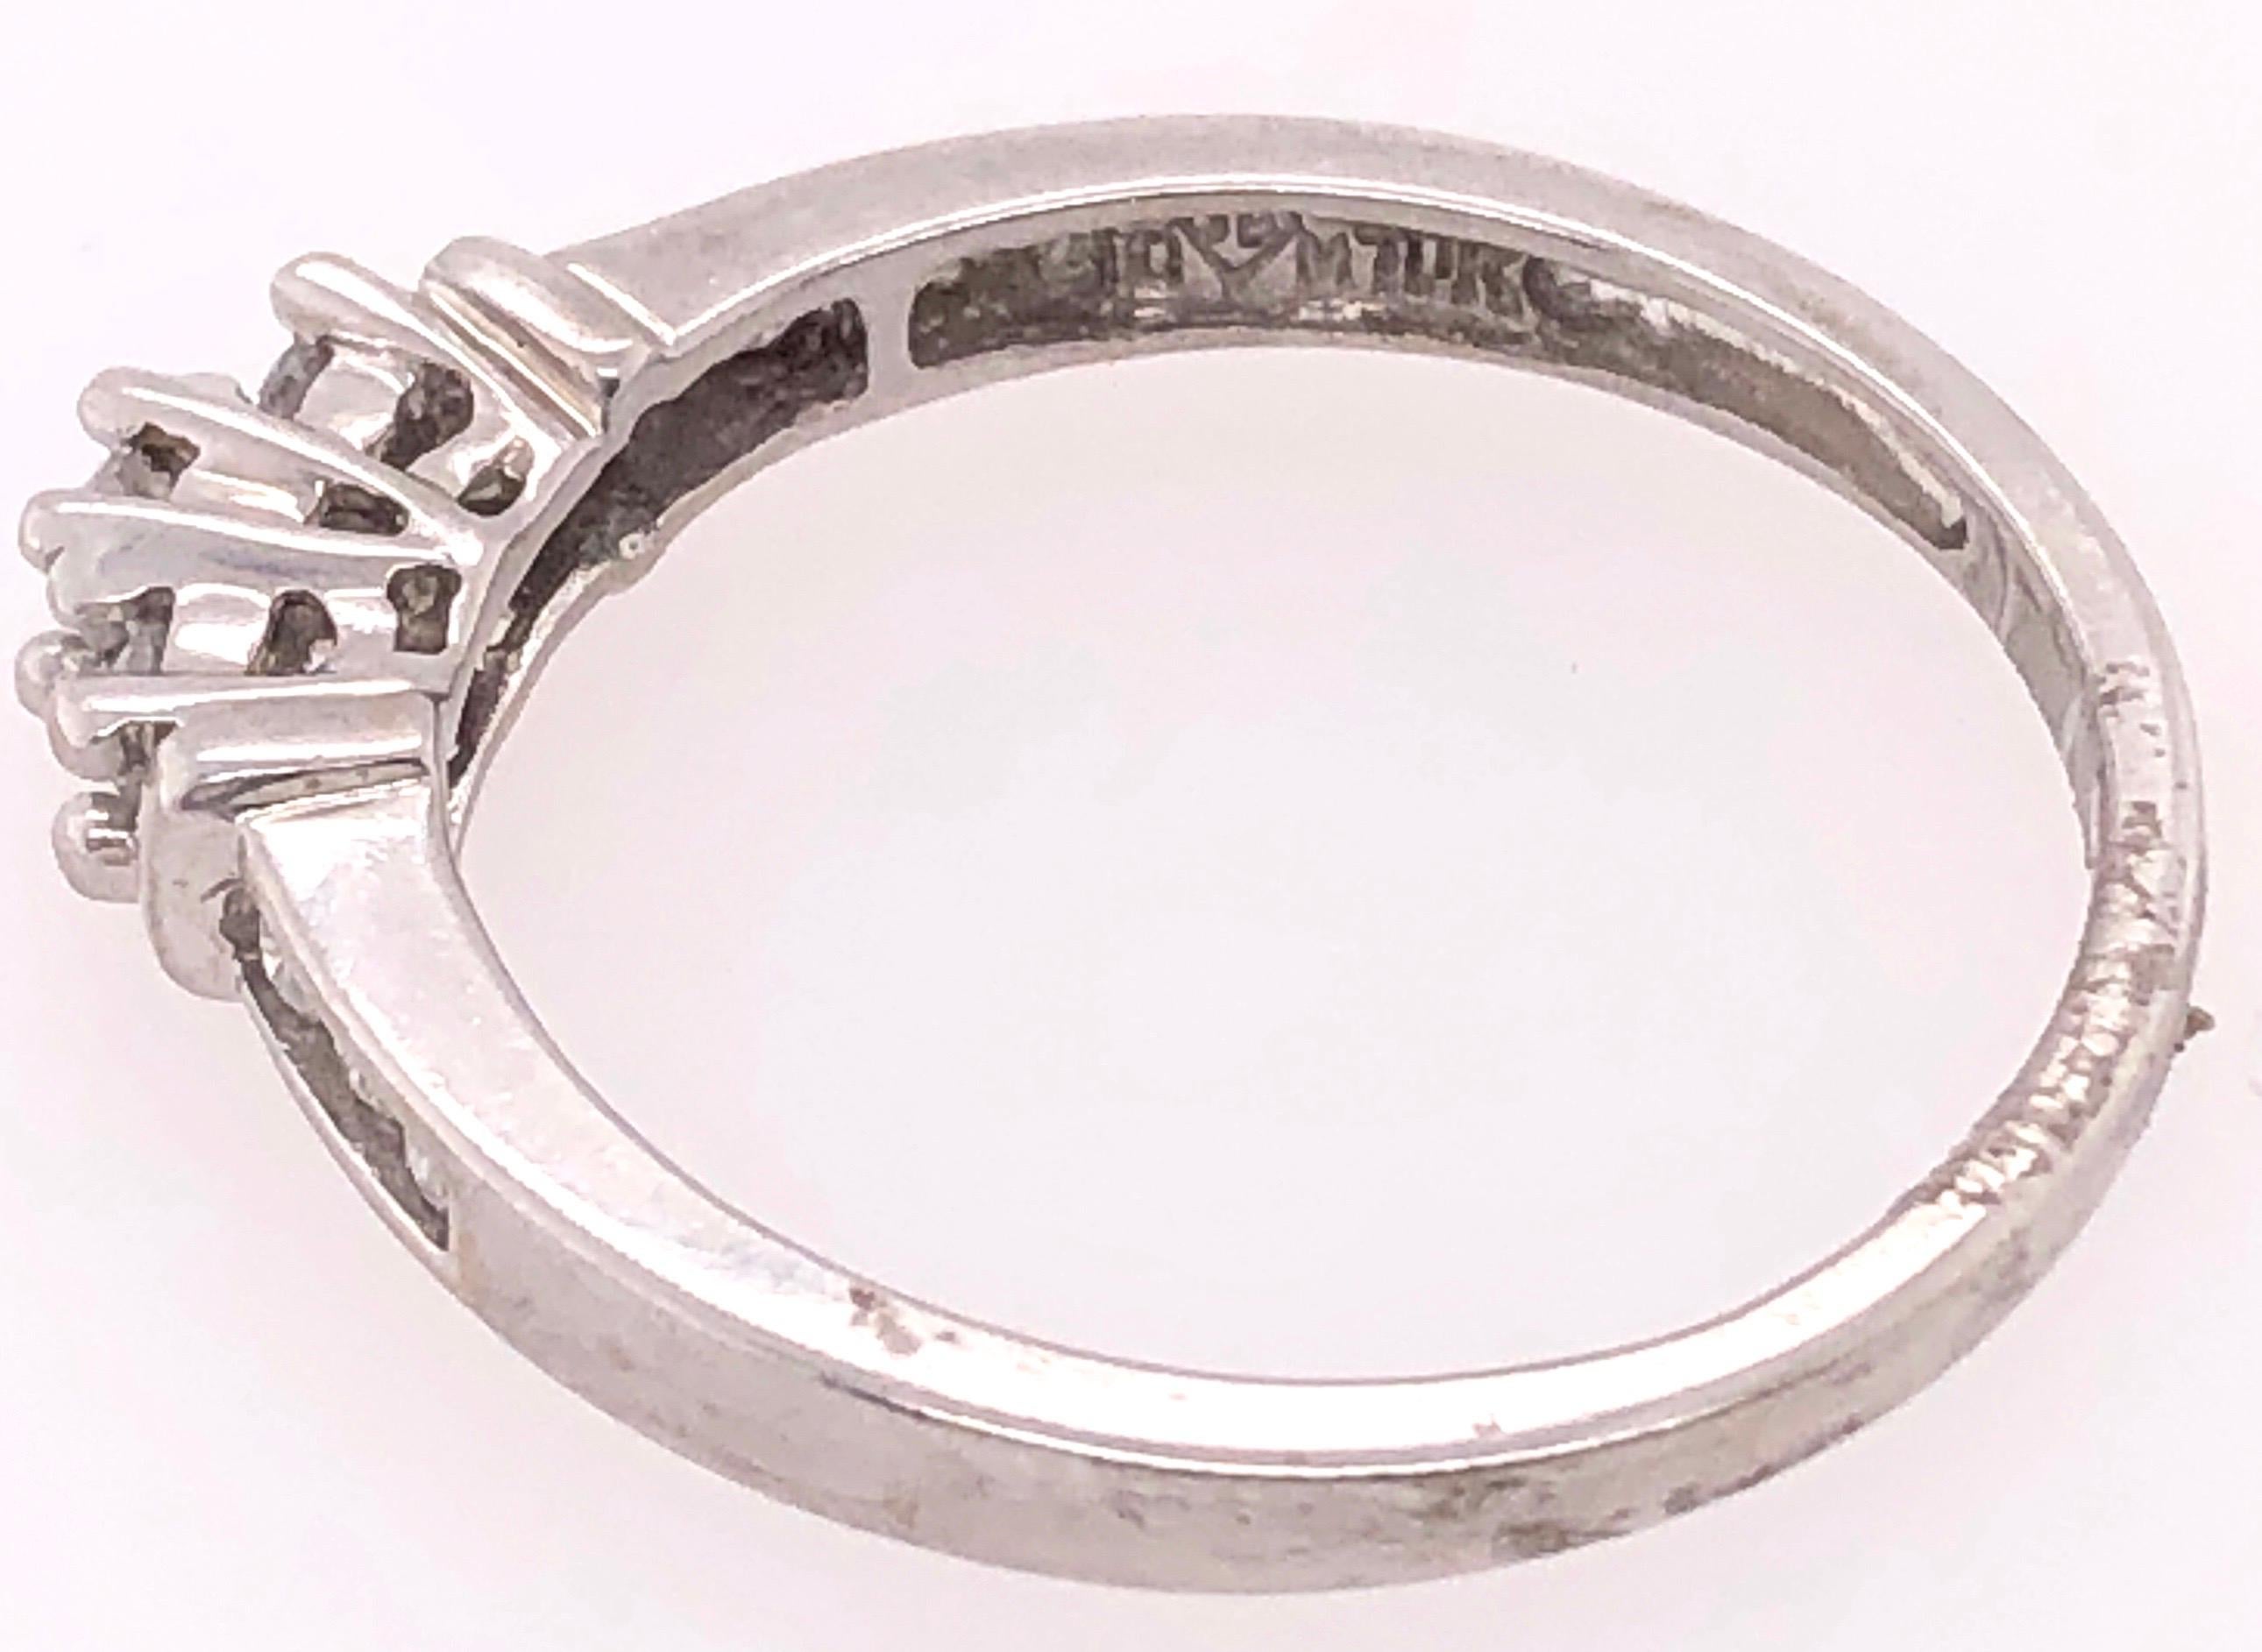 10 Karat White Gold Diamond Band Engagement Wedding Ring In Good Condition For Sale In Stamford, CT